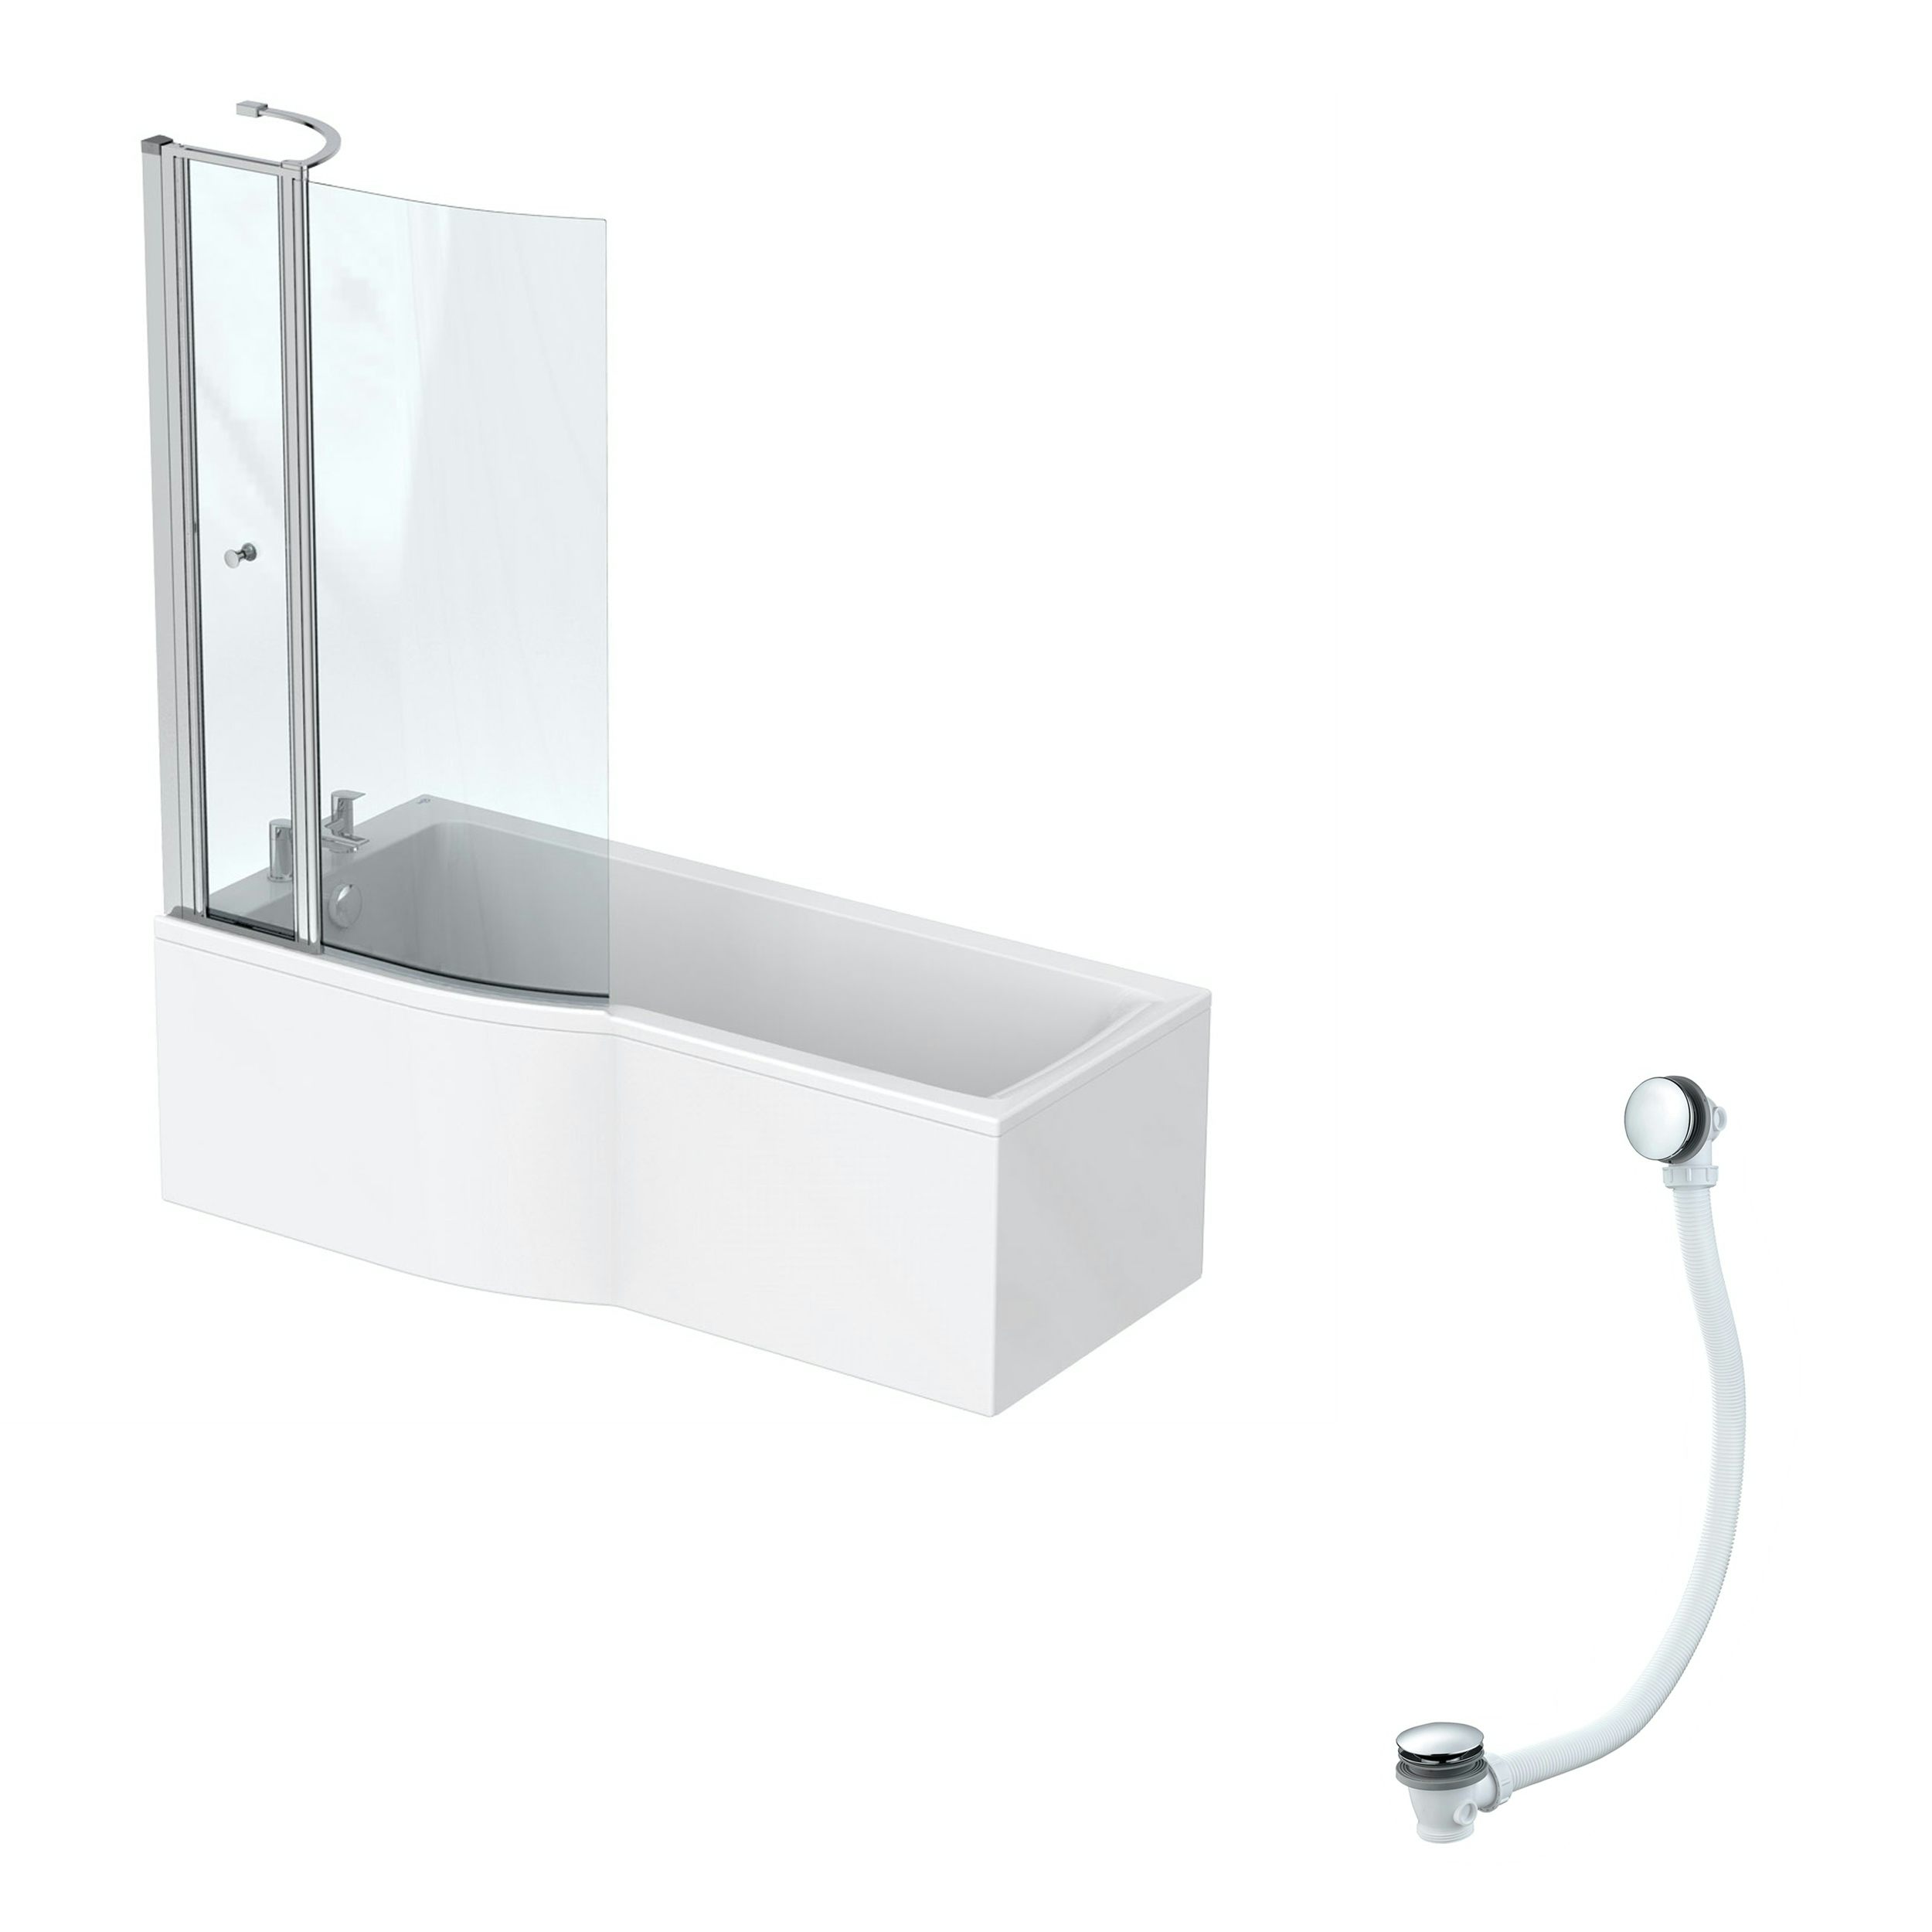 Ideal Standard Connect Air Idealform left hand shower bath 1700 x 800 with free bath waste